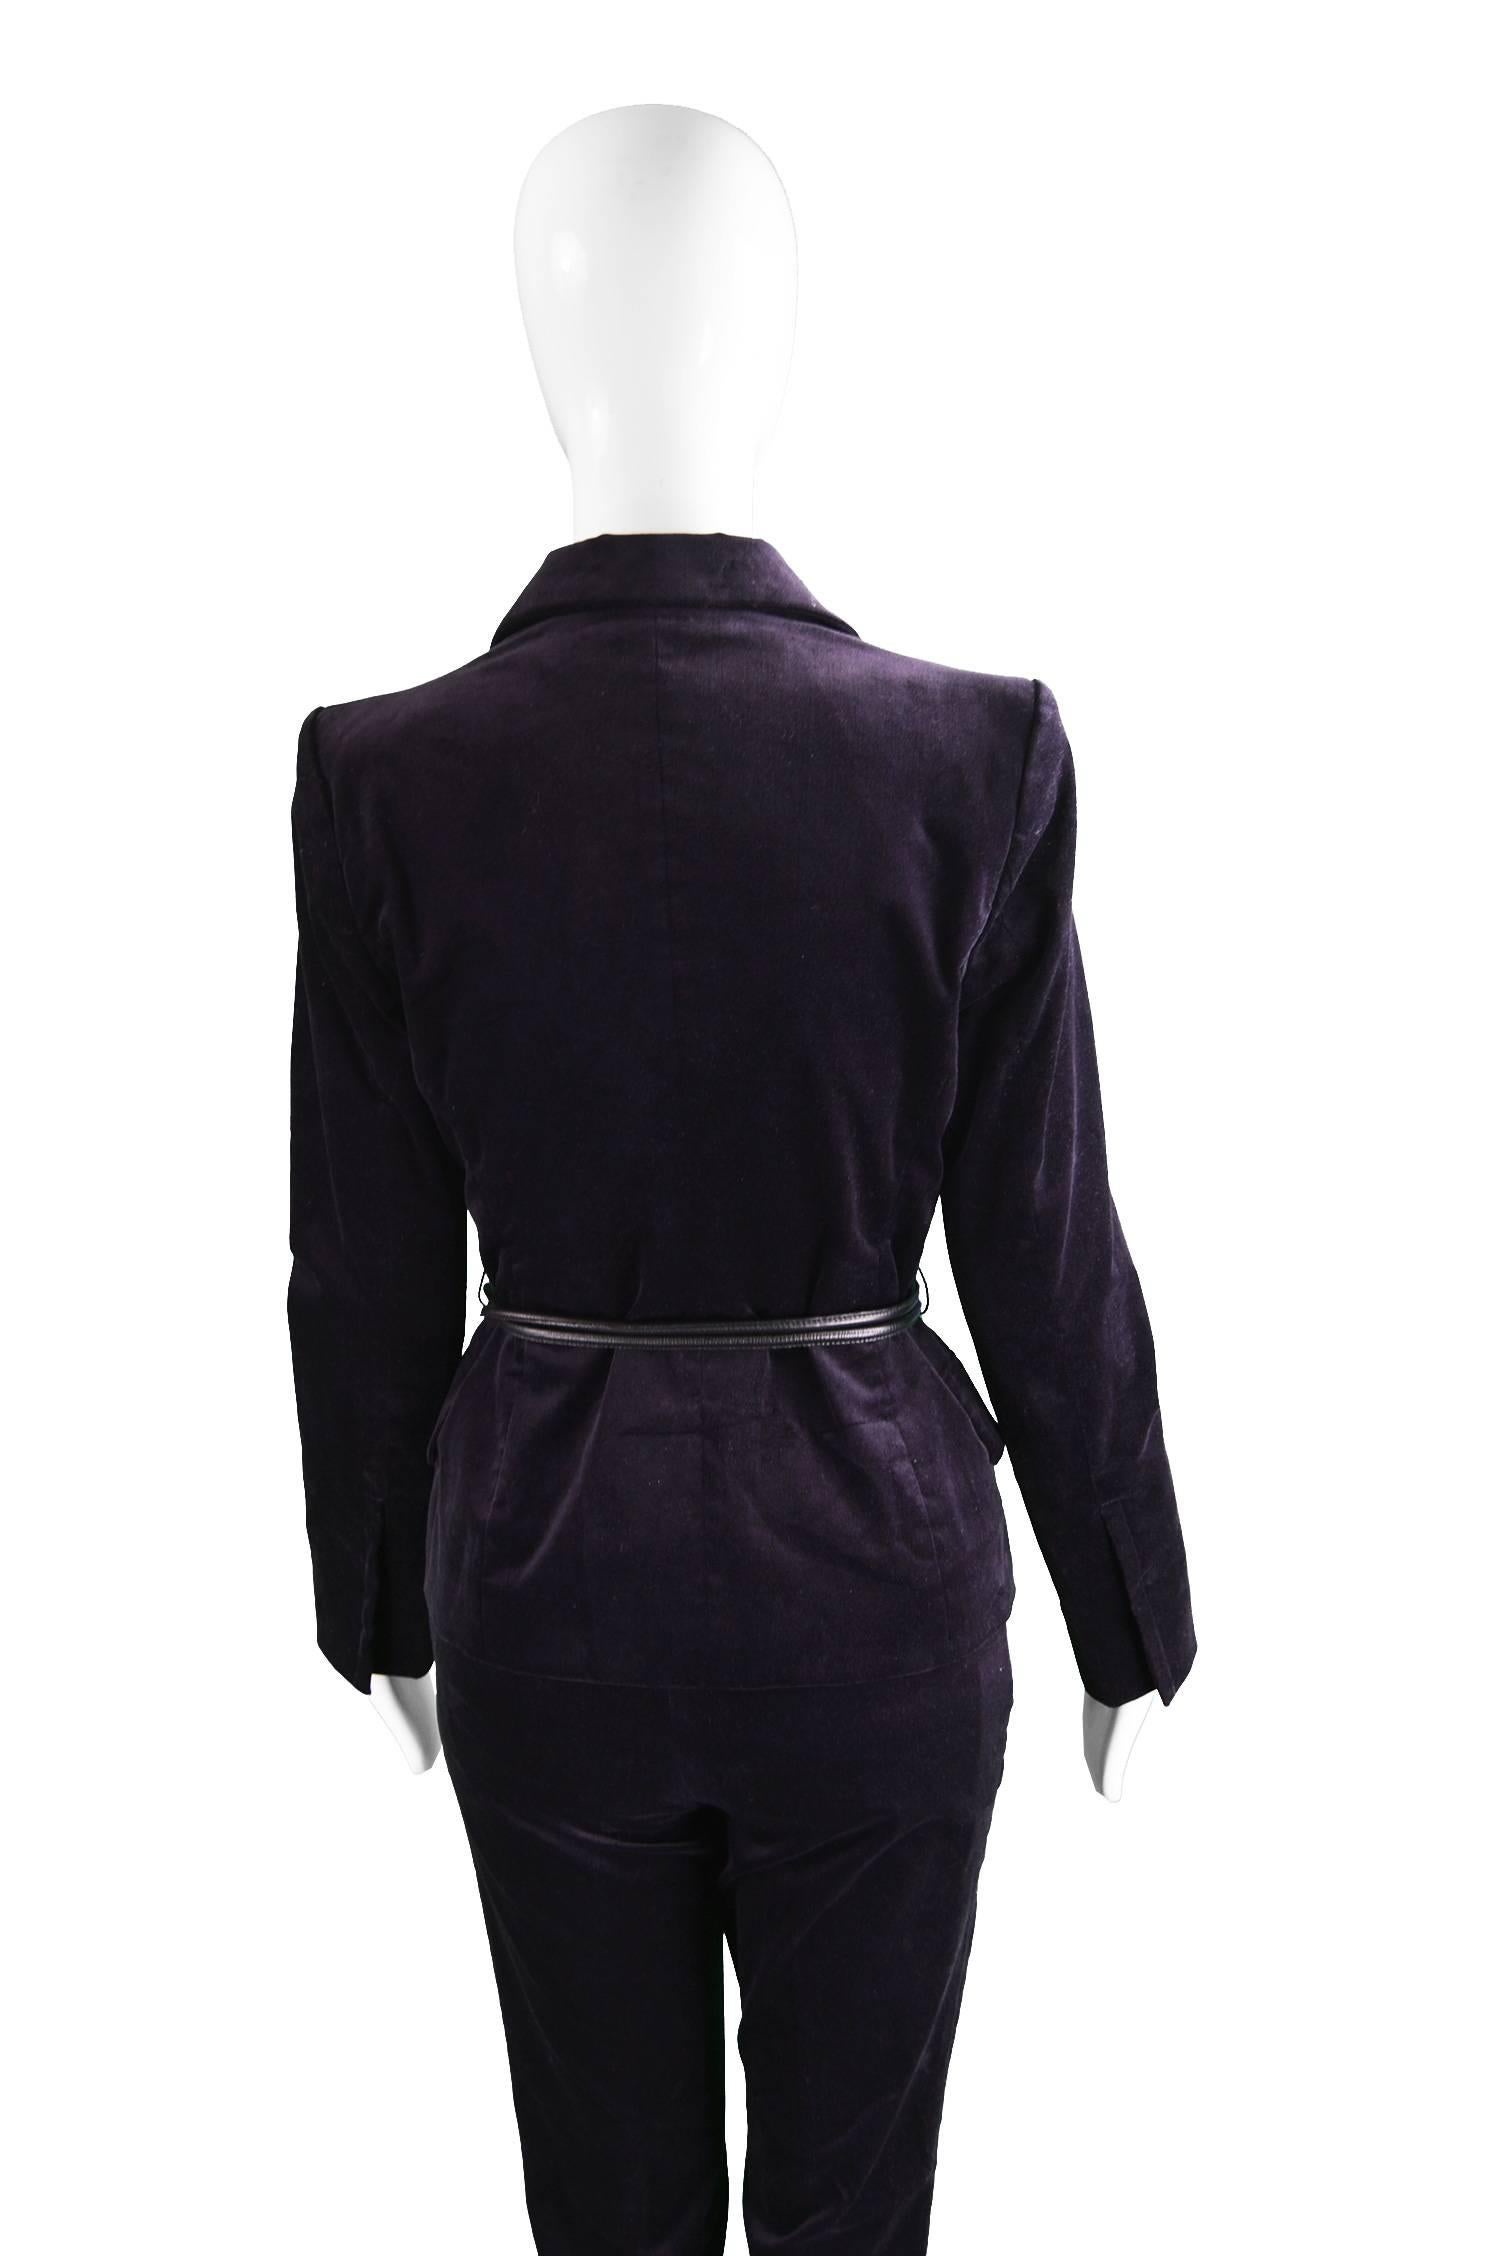 Tom Ford for Gucci Dark Purple Velvet Pant Suit with Leather Belt, Fall 2004 In Excellent Condition In Doncaster, South Yorkshire